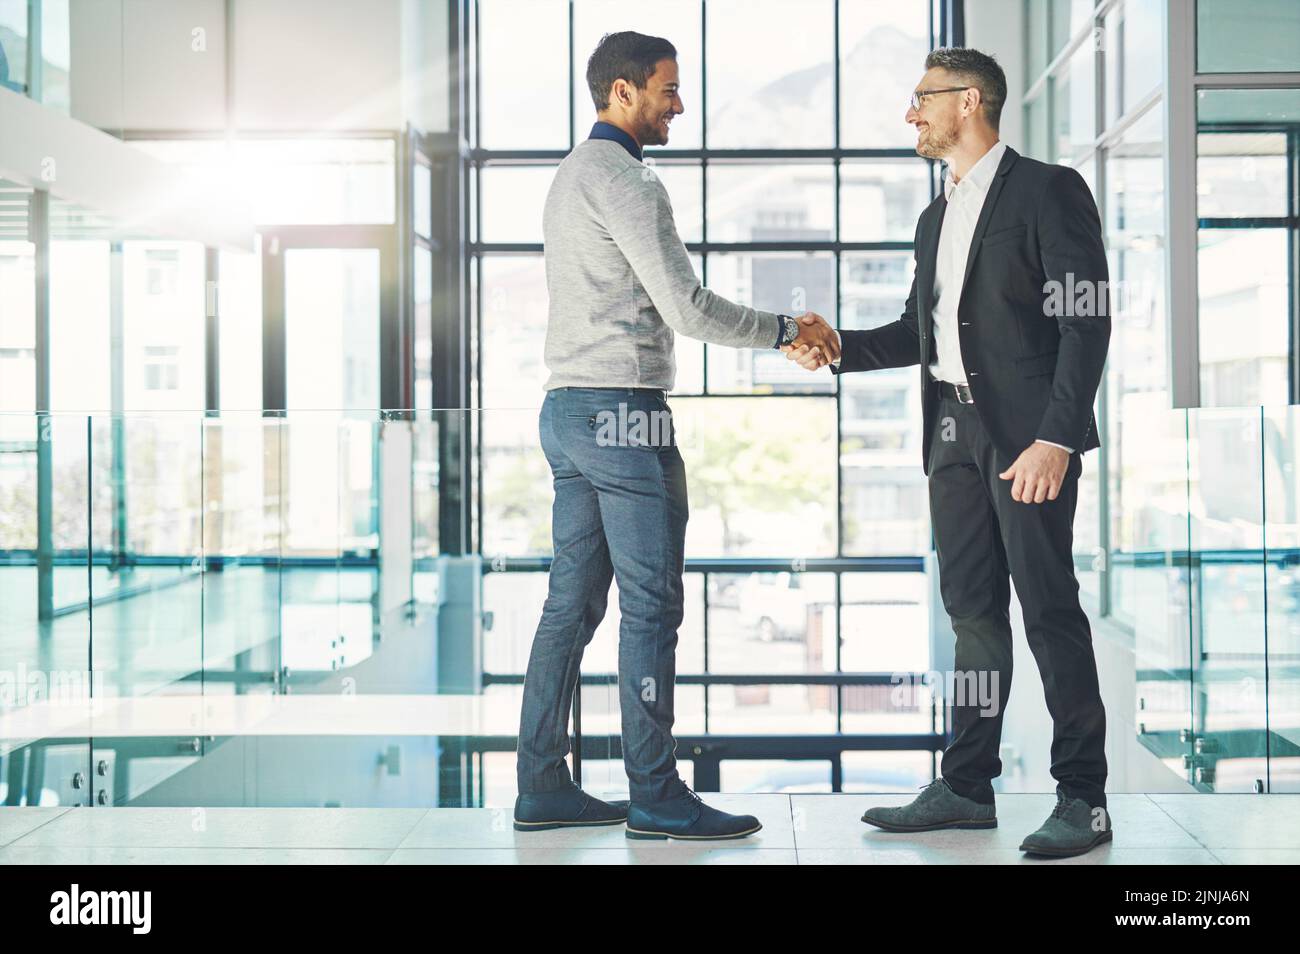 Handshake, teamwork and working together with corporate business men and colleagues at work as a team. Making a deal during a meeting, greeting and Stock Photo